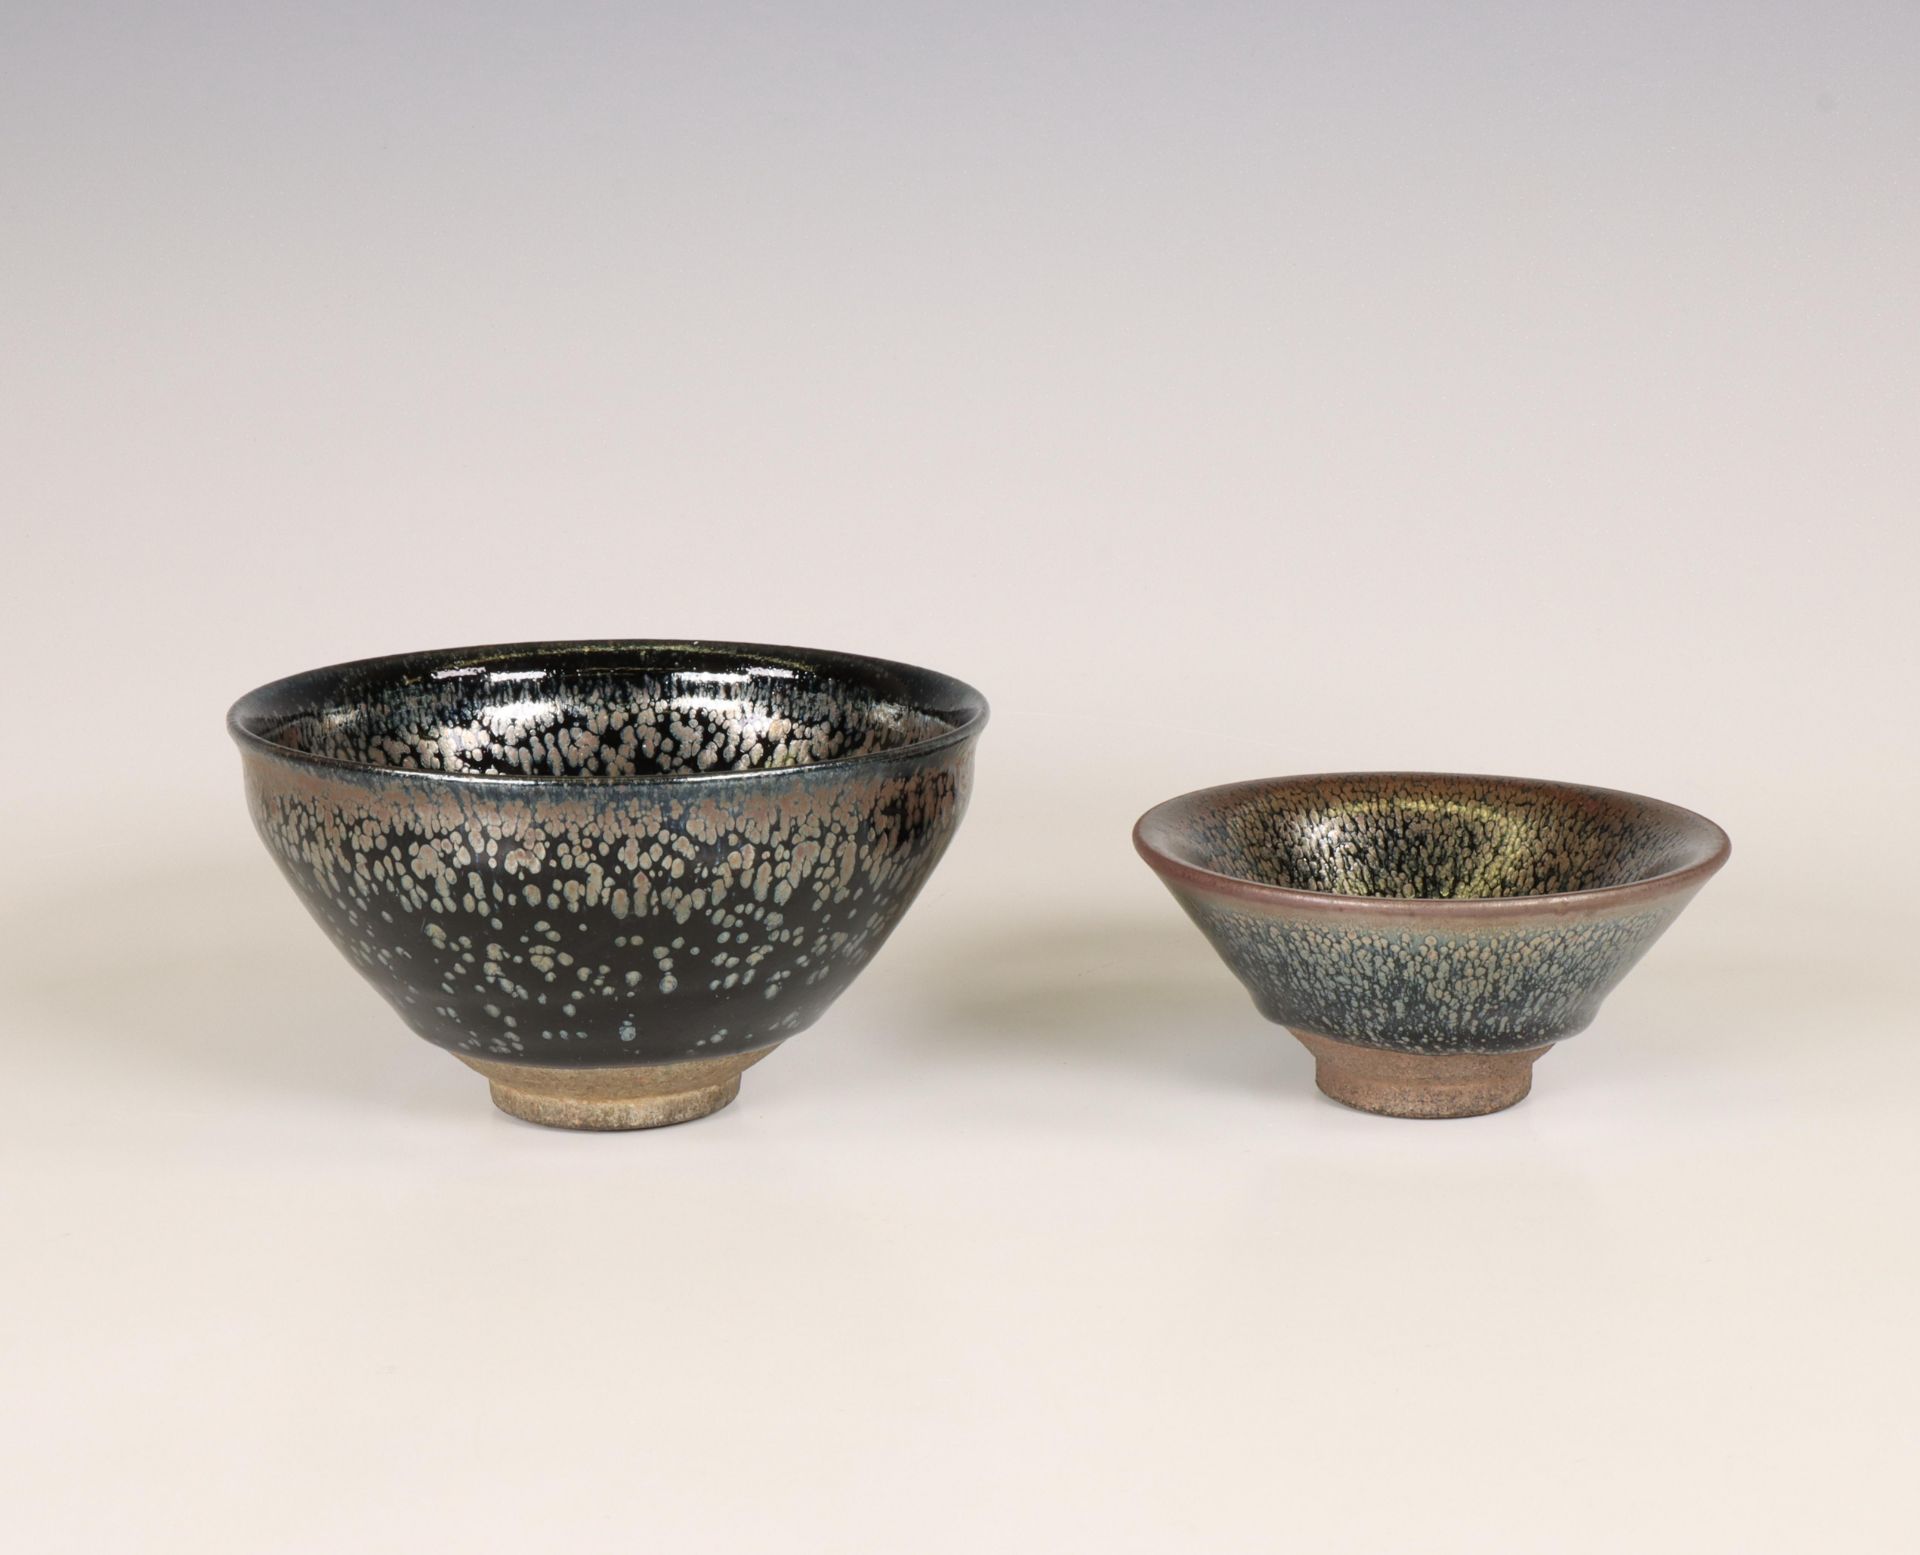 China, two silver-spot earthenware bowls, possibly Song dynasty (960-1279),